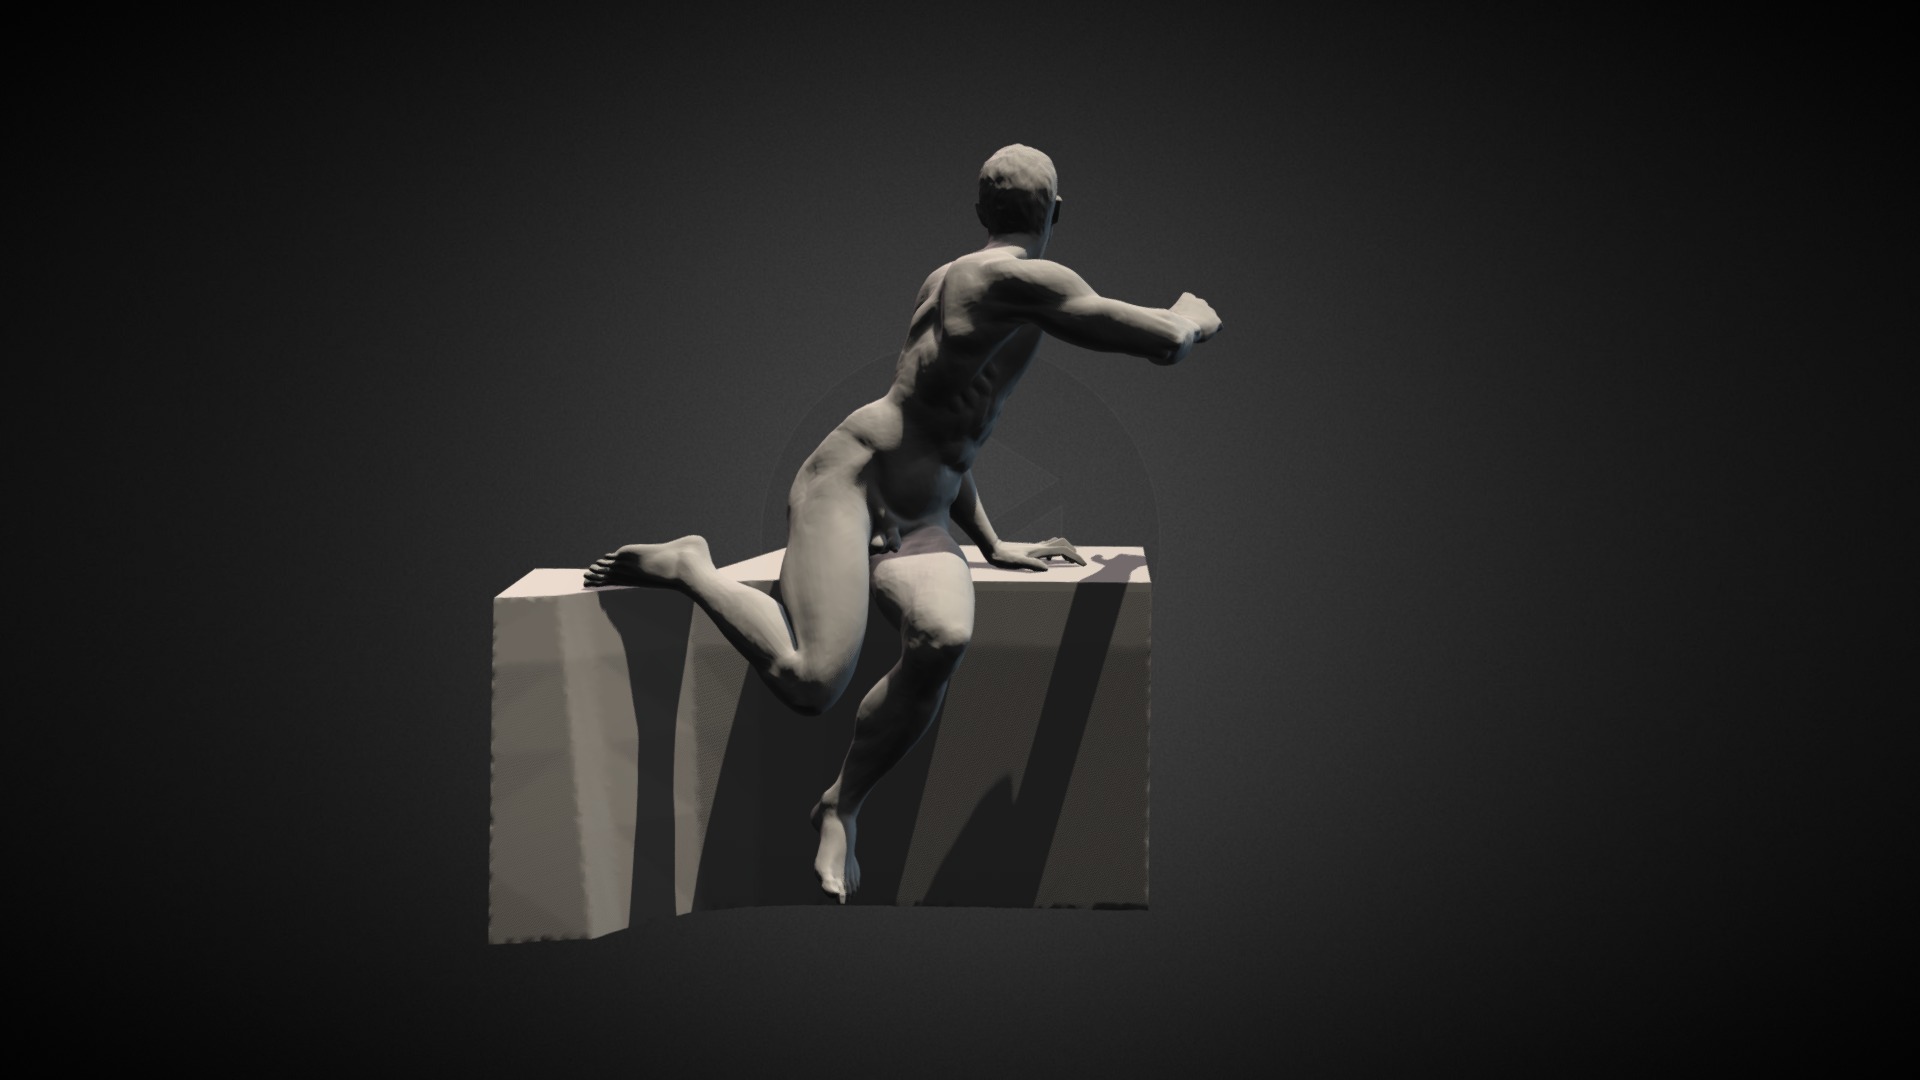 WIP from my sculpture project on three-dimensional transposal of Michelangelo's Battle of Cascina 3d model